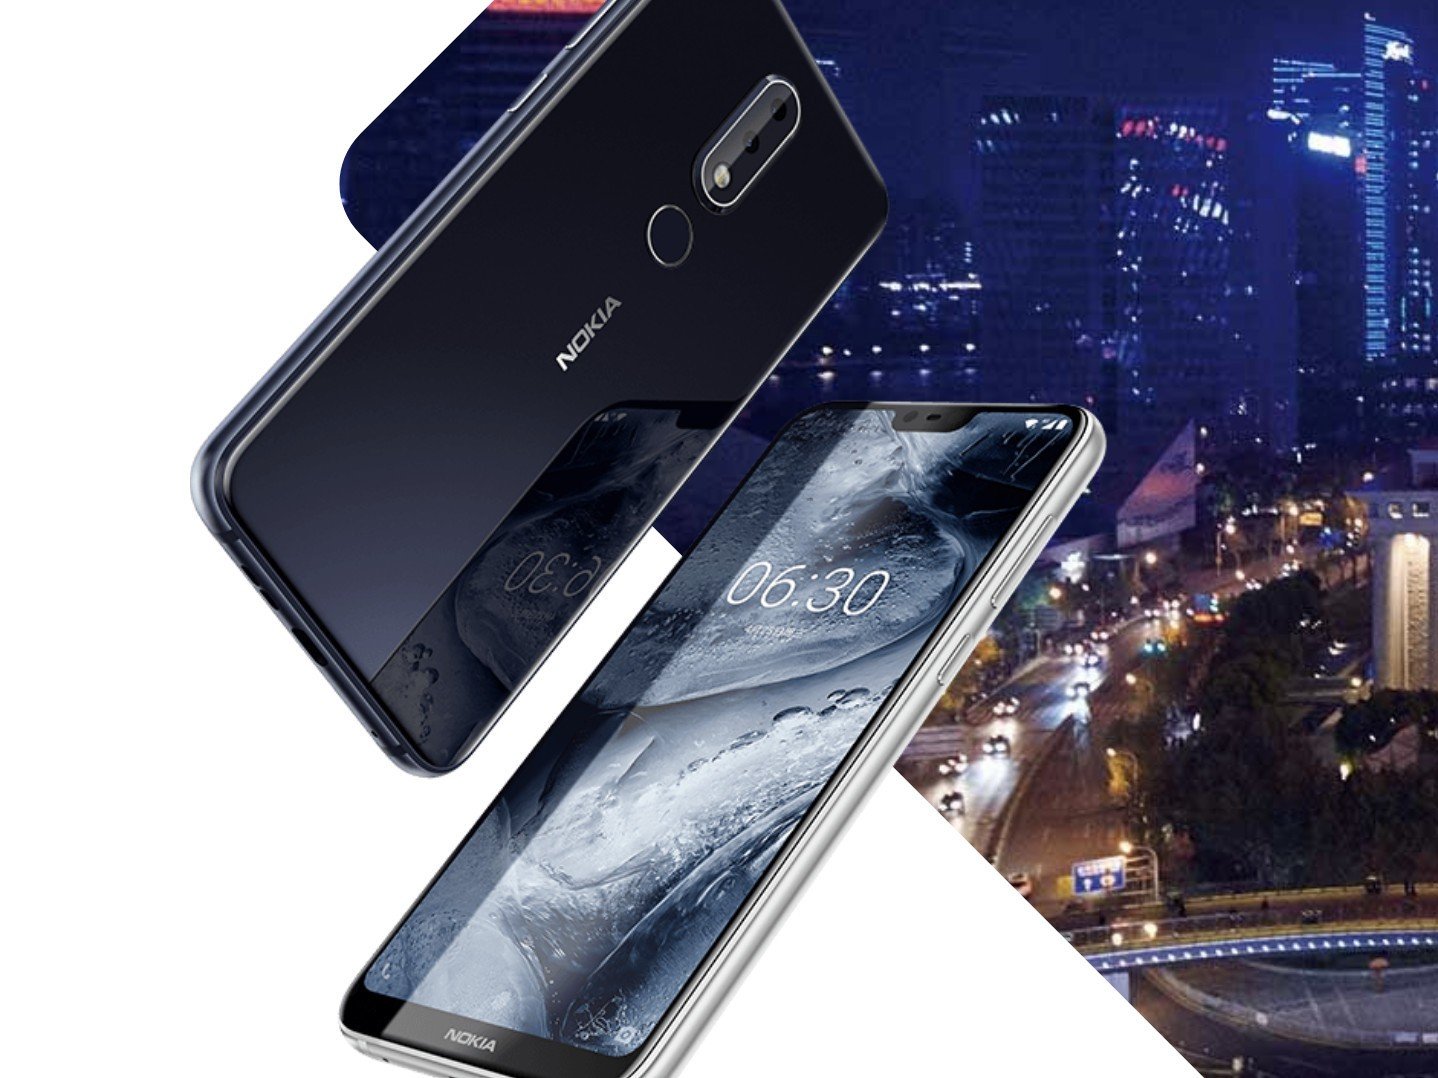 Nokia preps X6 handset for India launch